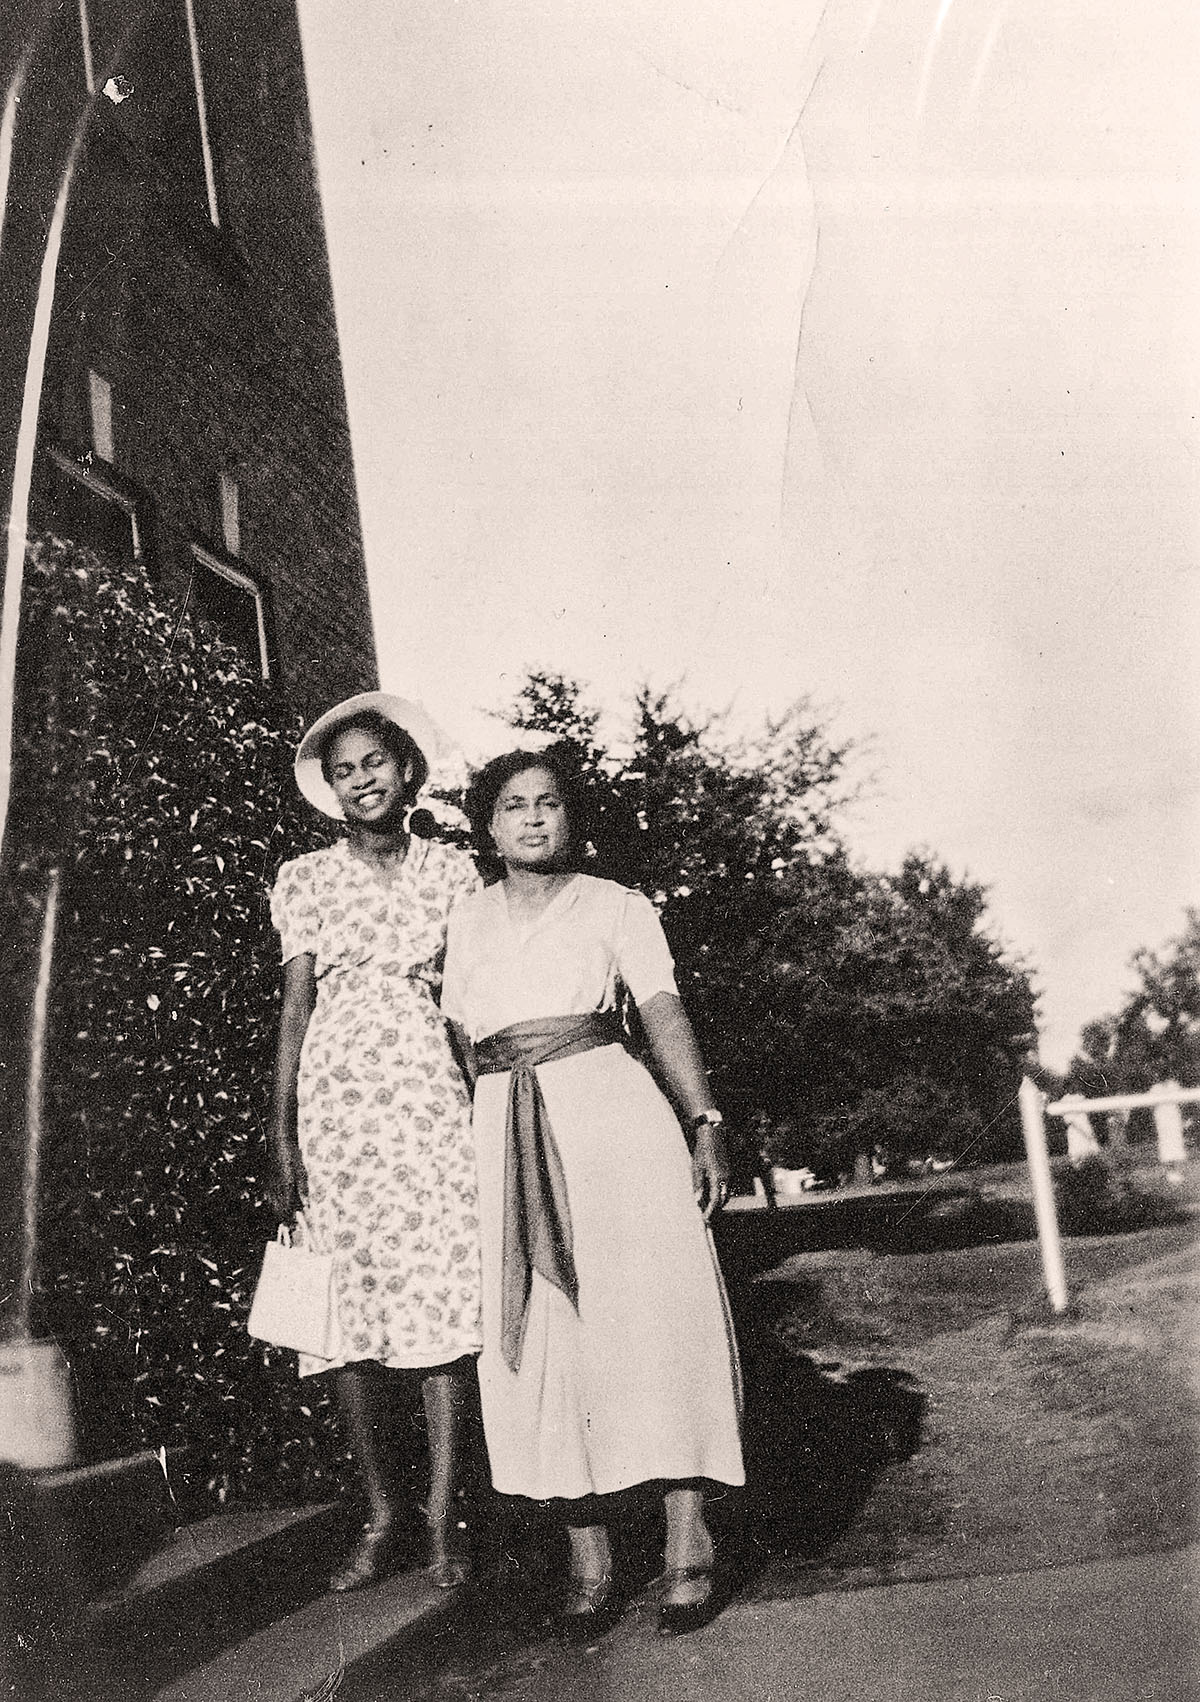 A black and white picture of Diane and another child in a white dress